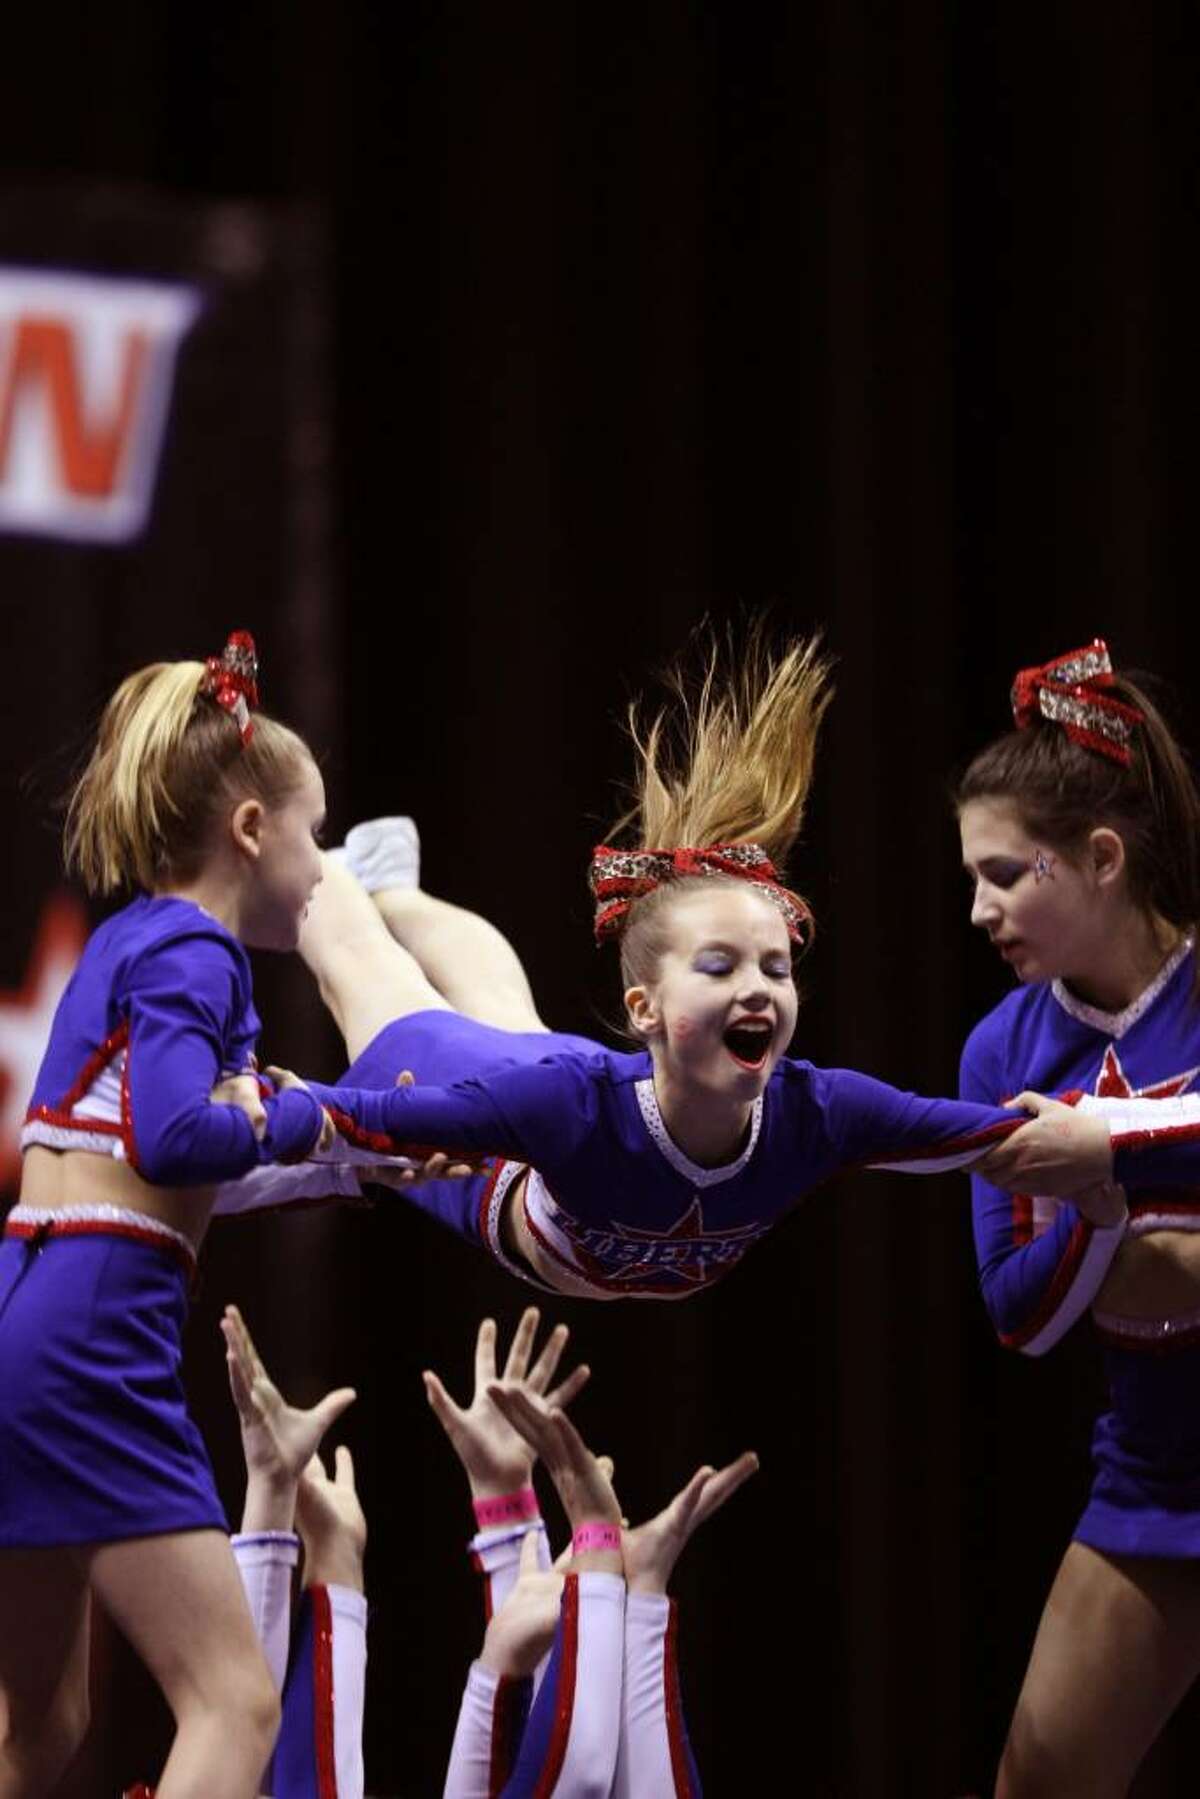 Liberty Senior Stars cheerleaders Erika Bloes, left, of Riverside, Shelby Hopper, center, of Riverside, and Amanda Friedlander, right, of Cos Cob, are captured in action in the center of the pyramid.